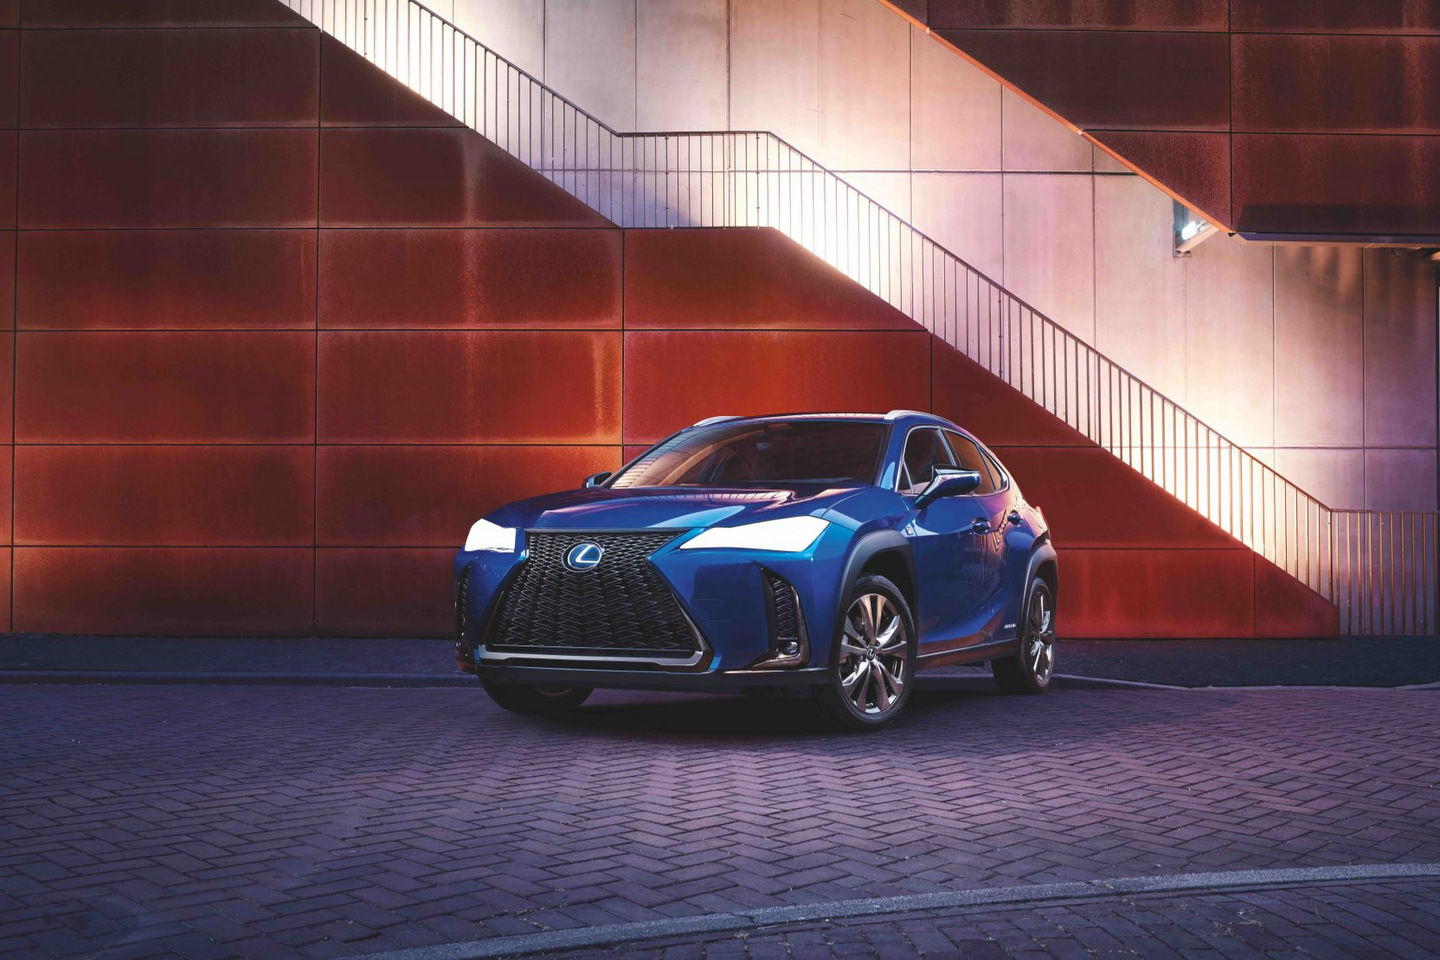 The Technologies that Improve the Fuel Economy in the Lexus UX